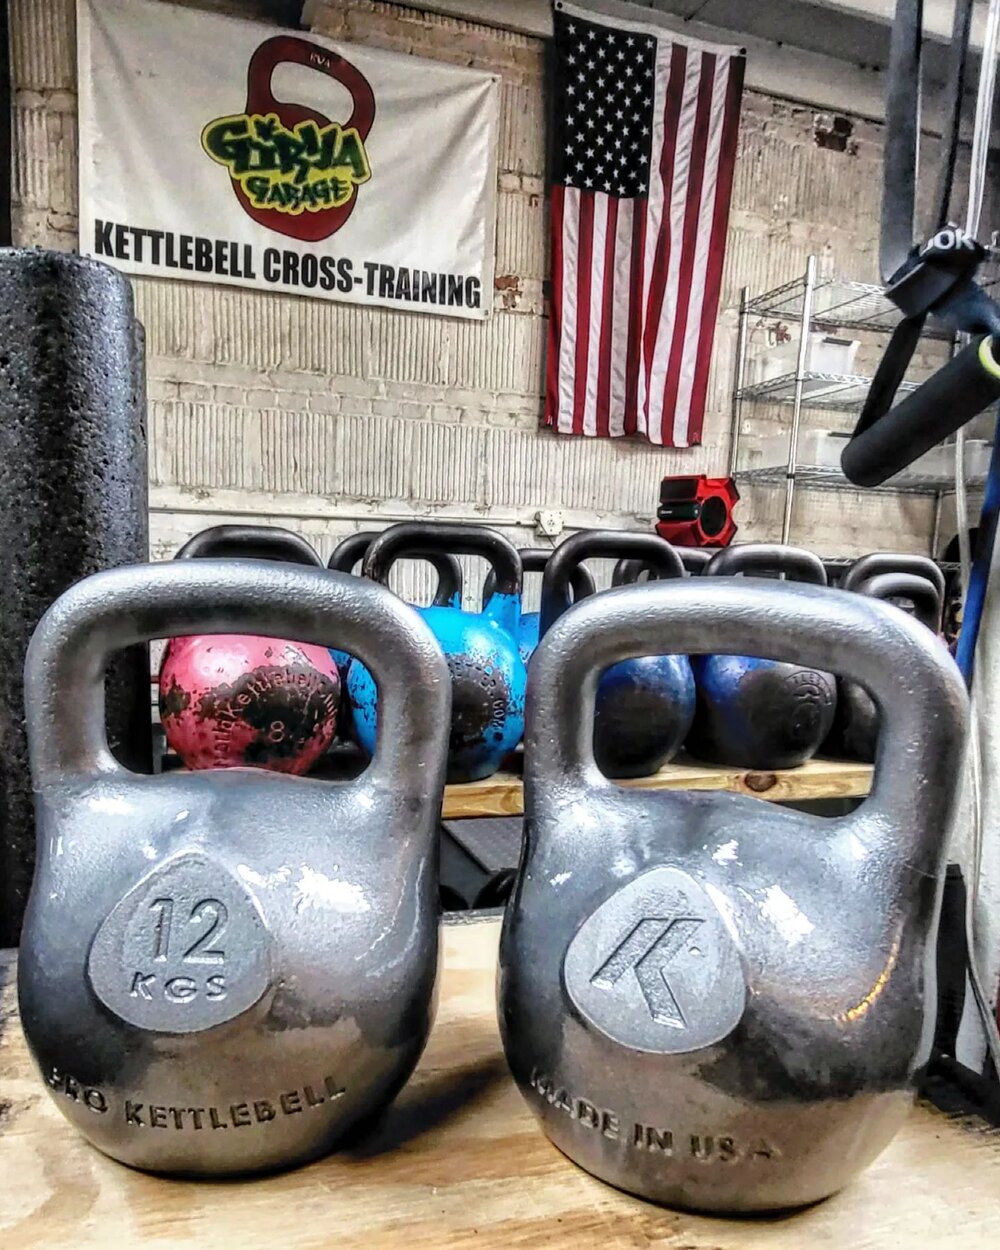 #OMG #itstwins 

@pro_kettlebell 
#madeintheusa

Come feel the difference. 

#girya #kettlebell
#madewithlove